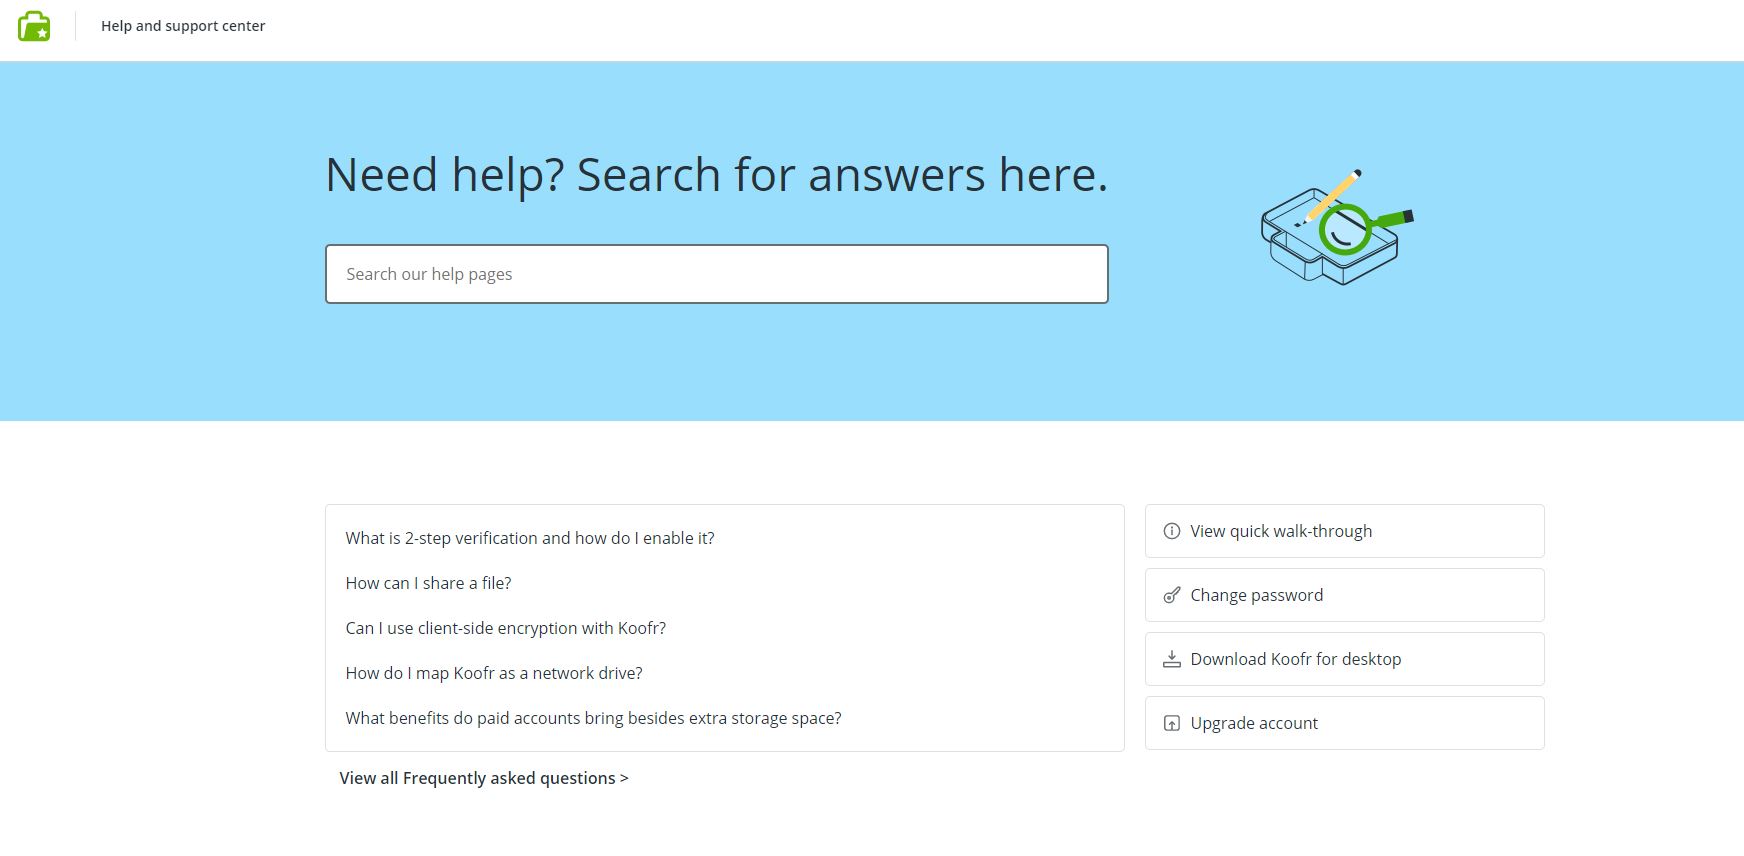 Find answers to frequently asked questions and get help with Koofr in our newly improved Help center.